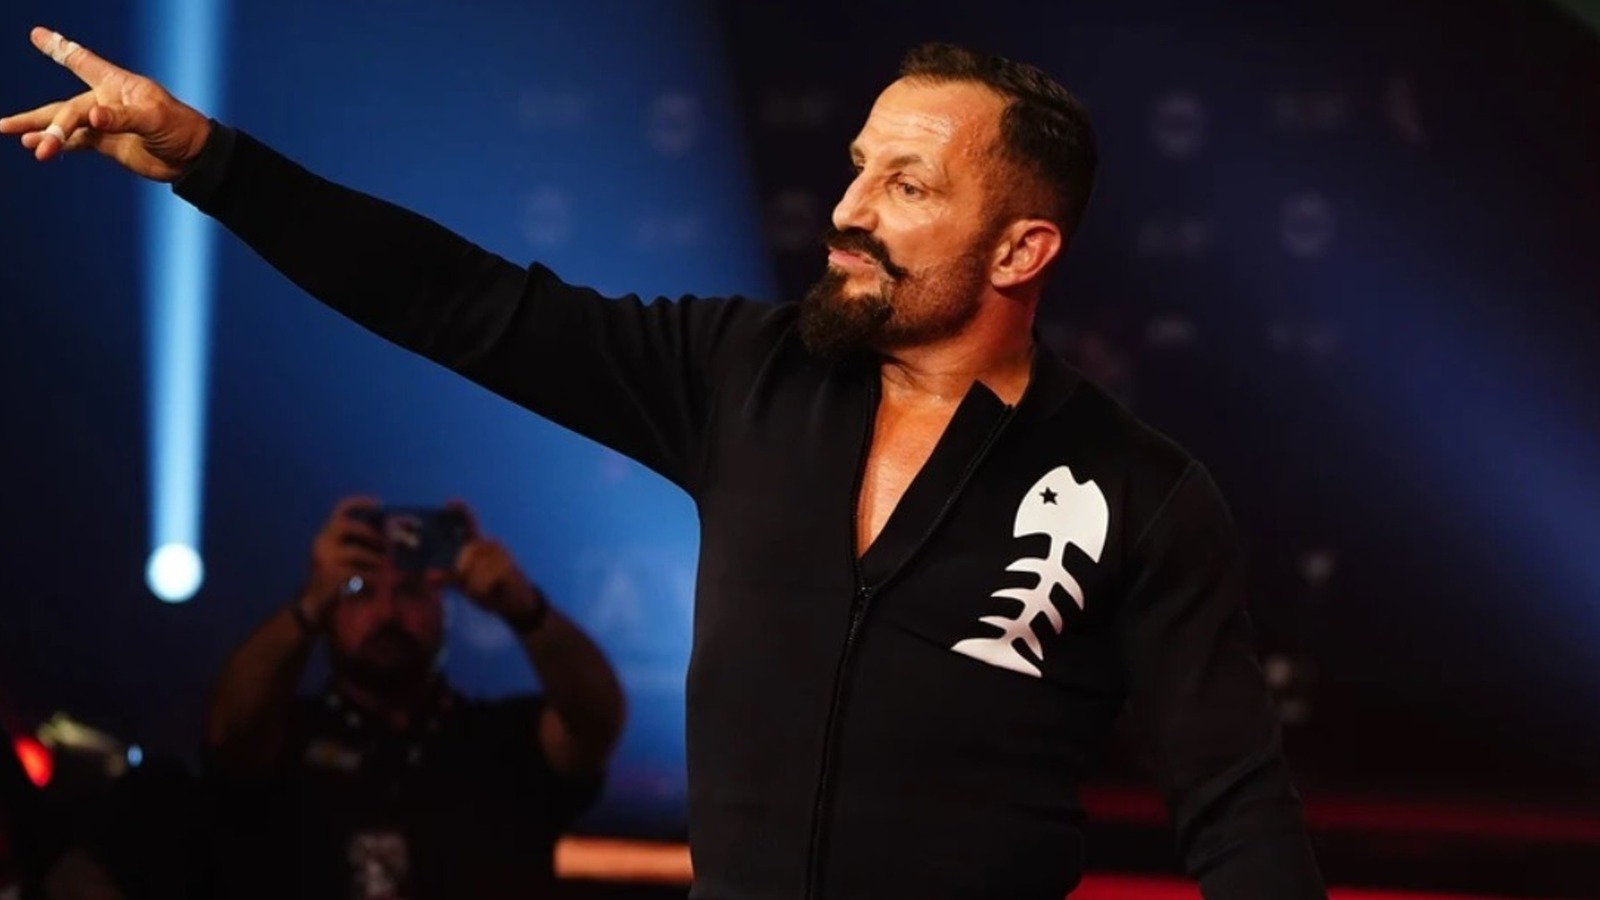 Bobby Fish Explains How Contract Negotiations With AEW Broke Down